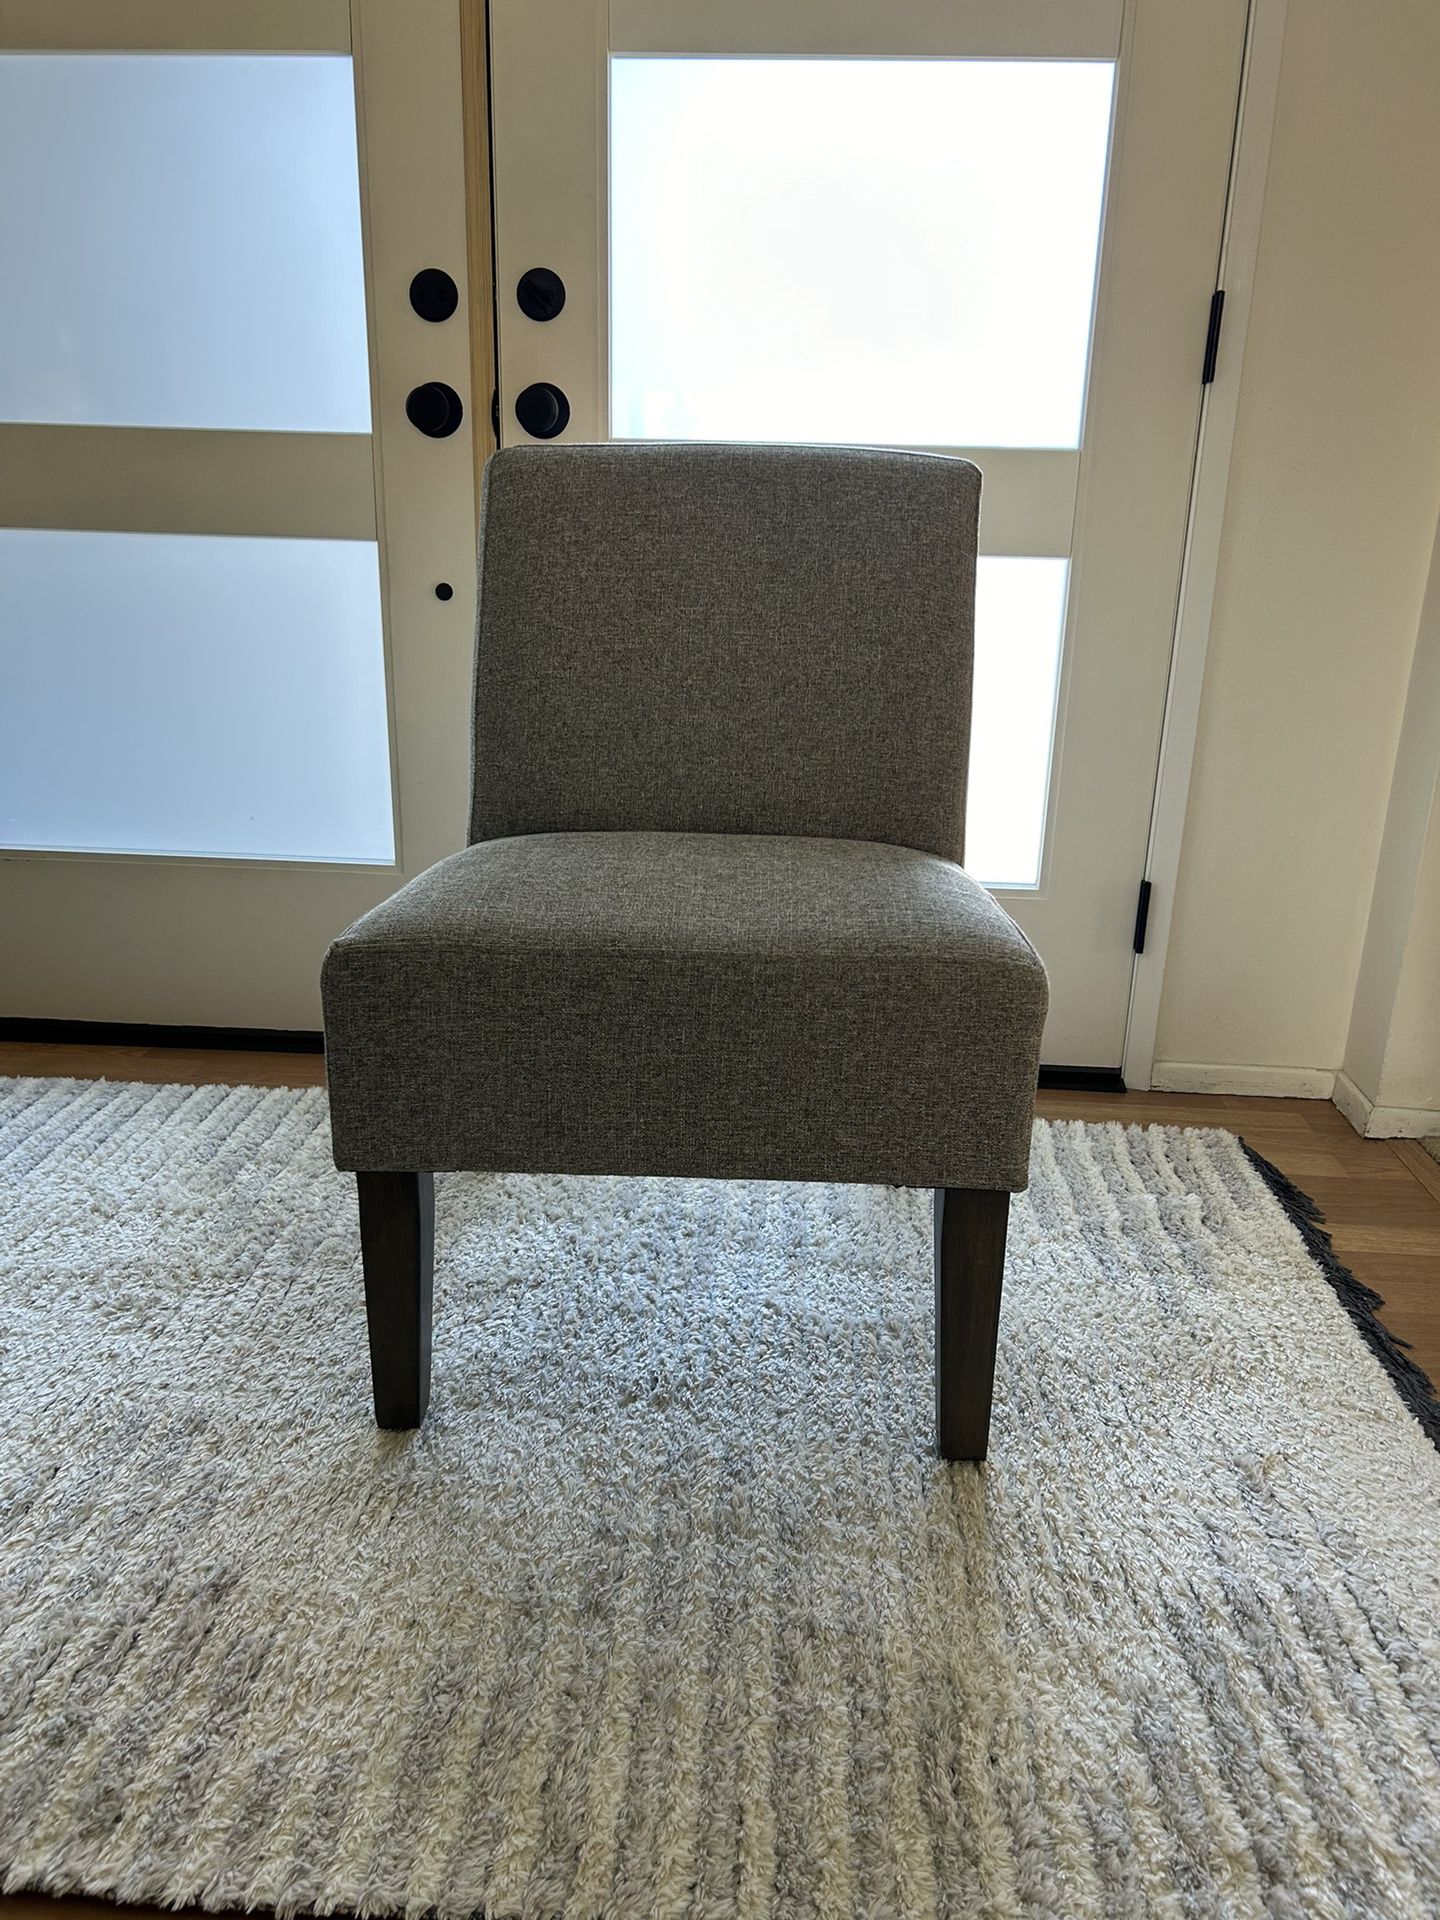 Good Condition Grey Chair